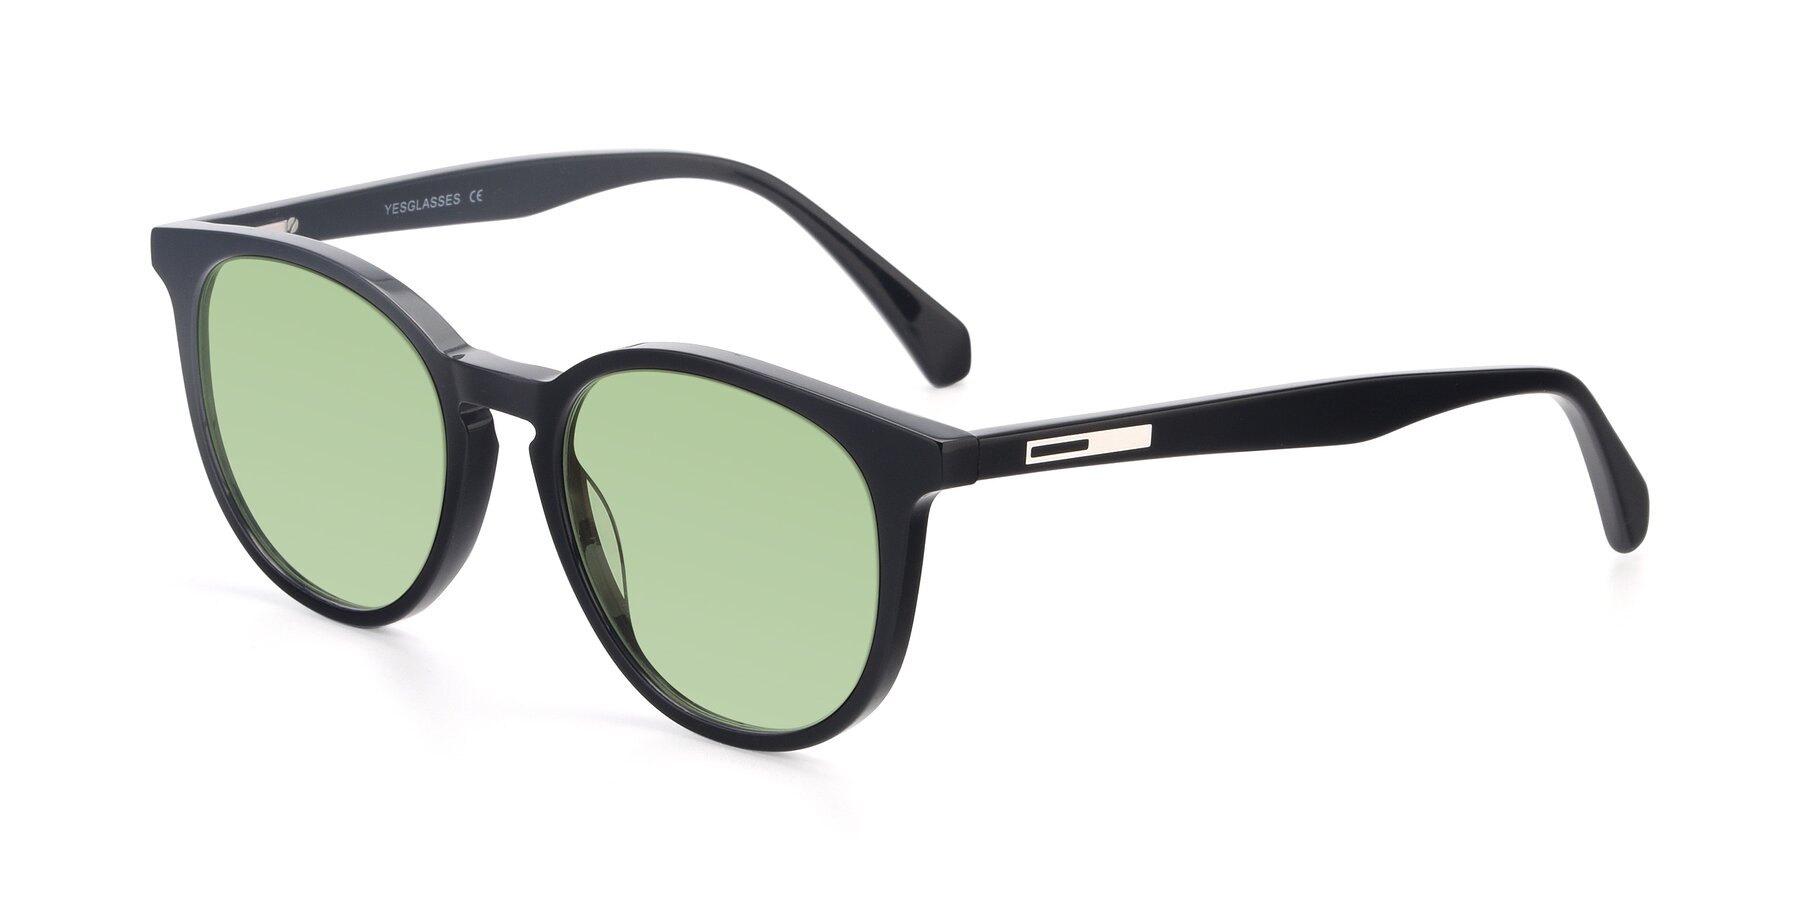 Angle of 17721 in Black with Medium Green Tinted Lenses